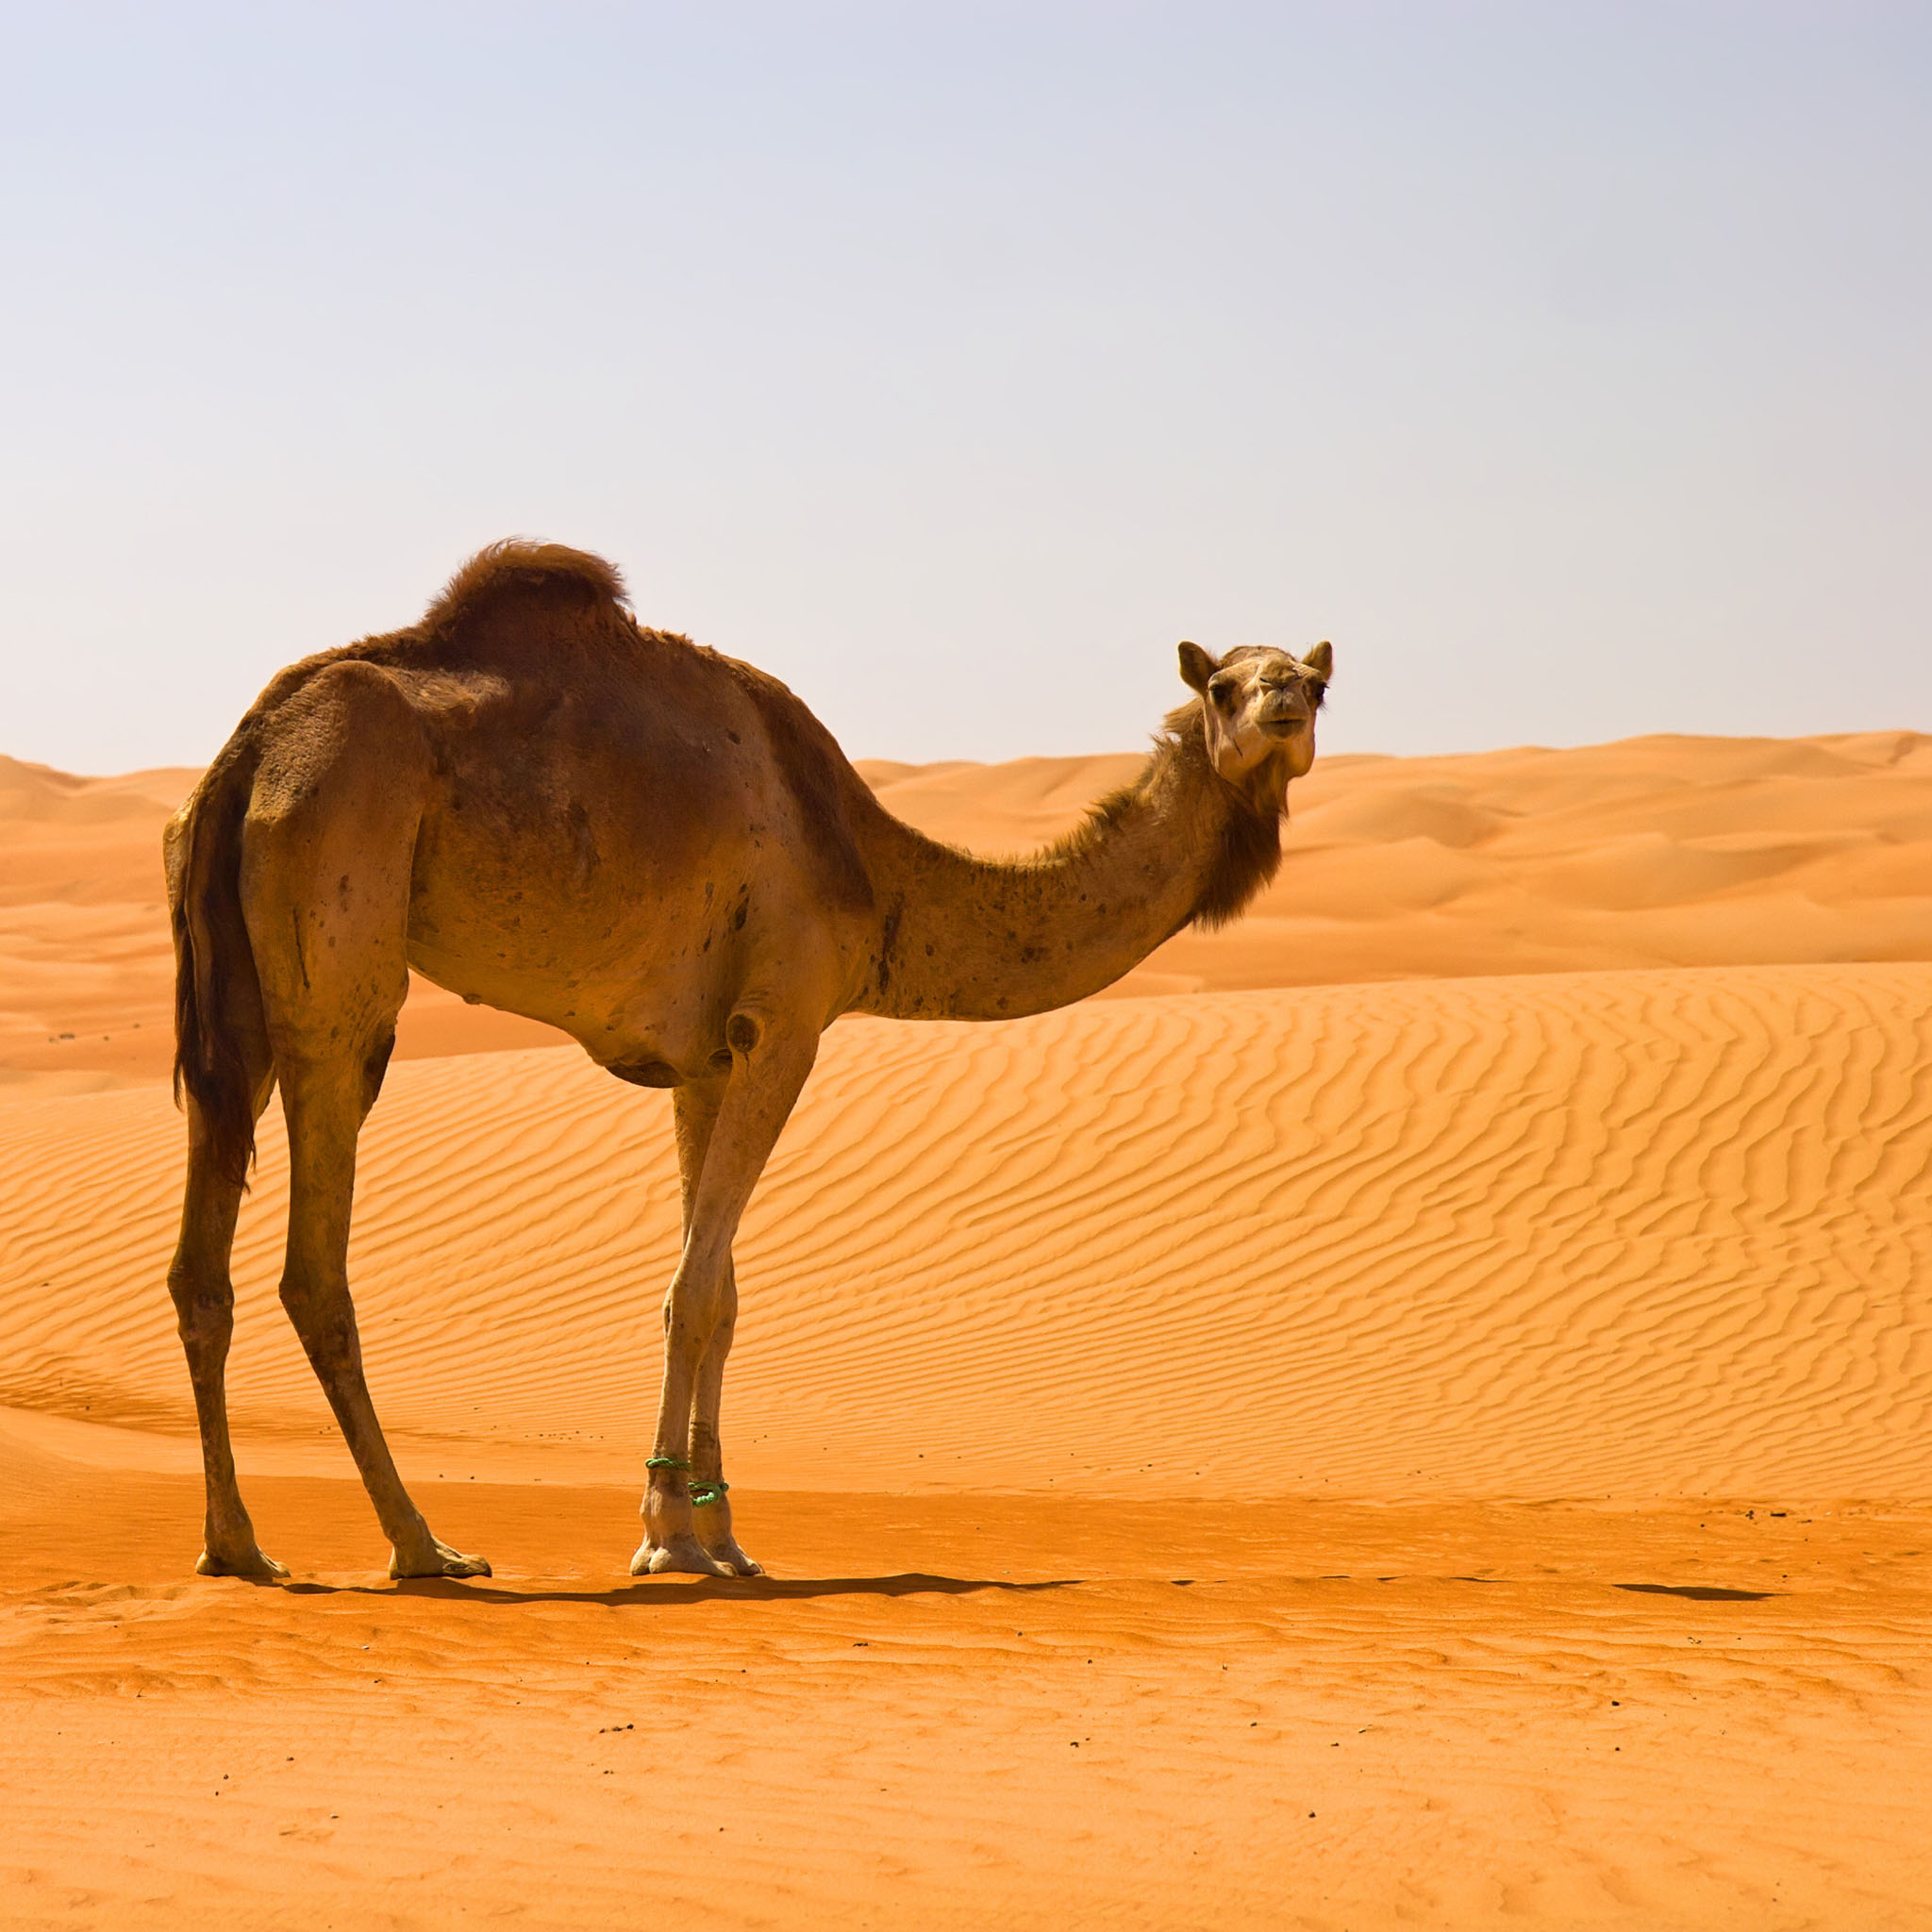 Mobile Camel Wallpaper Full HD Pictures